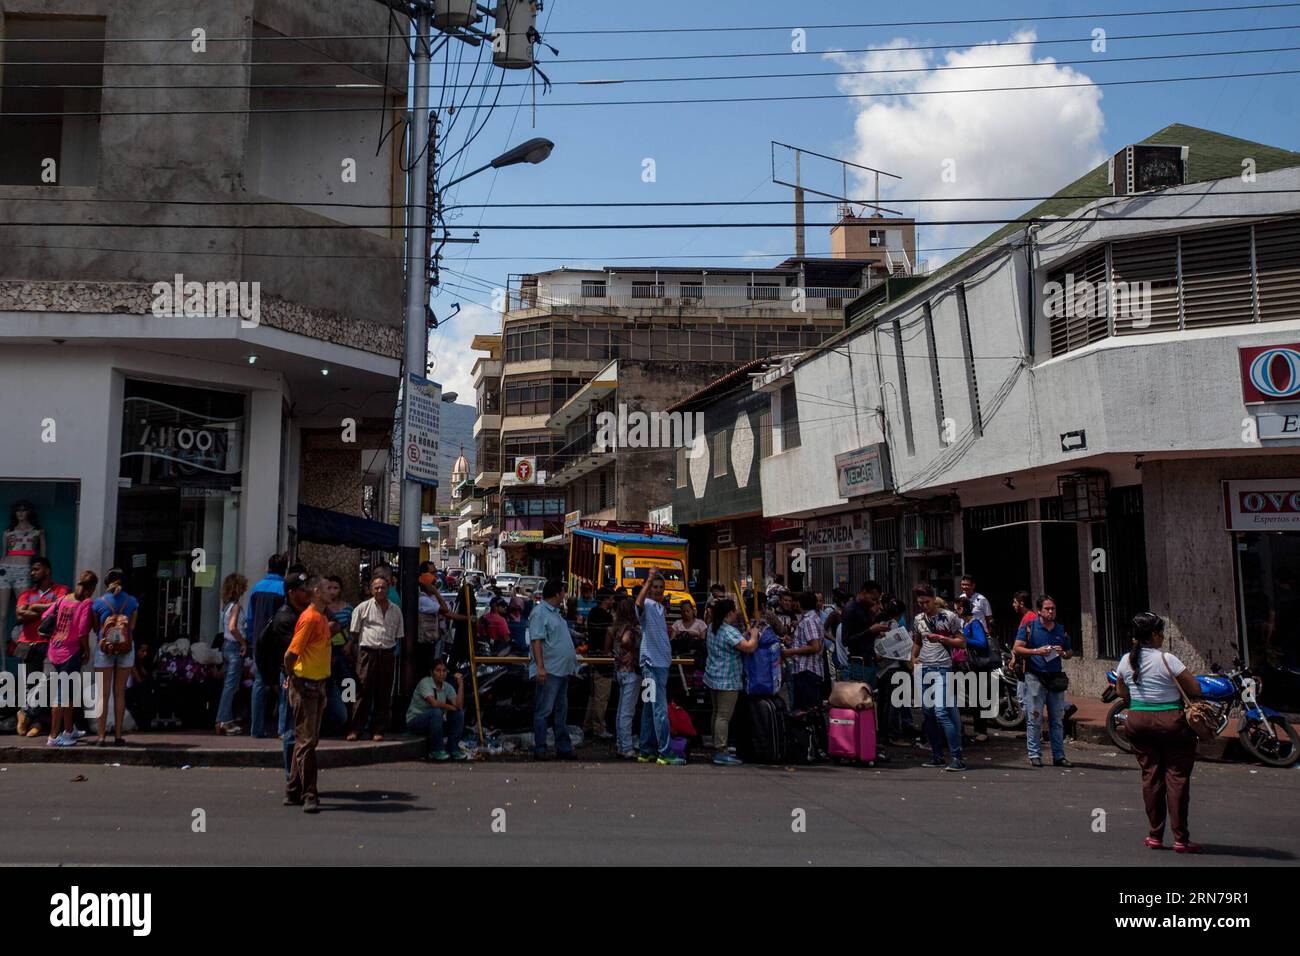 (150829) -- SAN ANTONIO, Aug. 28, 2015 -- People gather in front of a supermarket with their luggage, in San Antonio city, Venezuela, on Aug. 28, 2015. Venezuelan President Nicolas Maduro ordered last week the closure of the border with Colombia in San Antonio and Urena in the Venezuelan state of Tachira after the attack of alleged smugglers in which three members of the National Armed Bolivarian Force (FANB, for its acronym in Spanish) and a civilian were injured. ) (da) VENEZUELA-SAN ANTONIO-COLOMBIA-SECURITY-BORDER Str PUBLICATIONxNOTxINxCHN   San Antonio Aug 28 2015 Celebrities gather in F Stock Photo